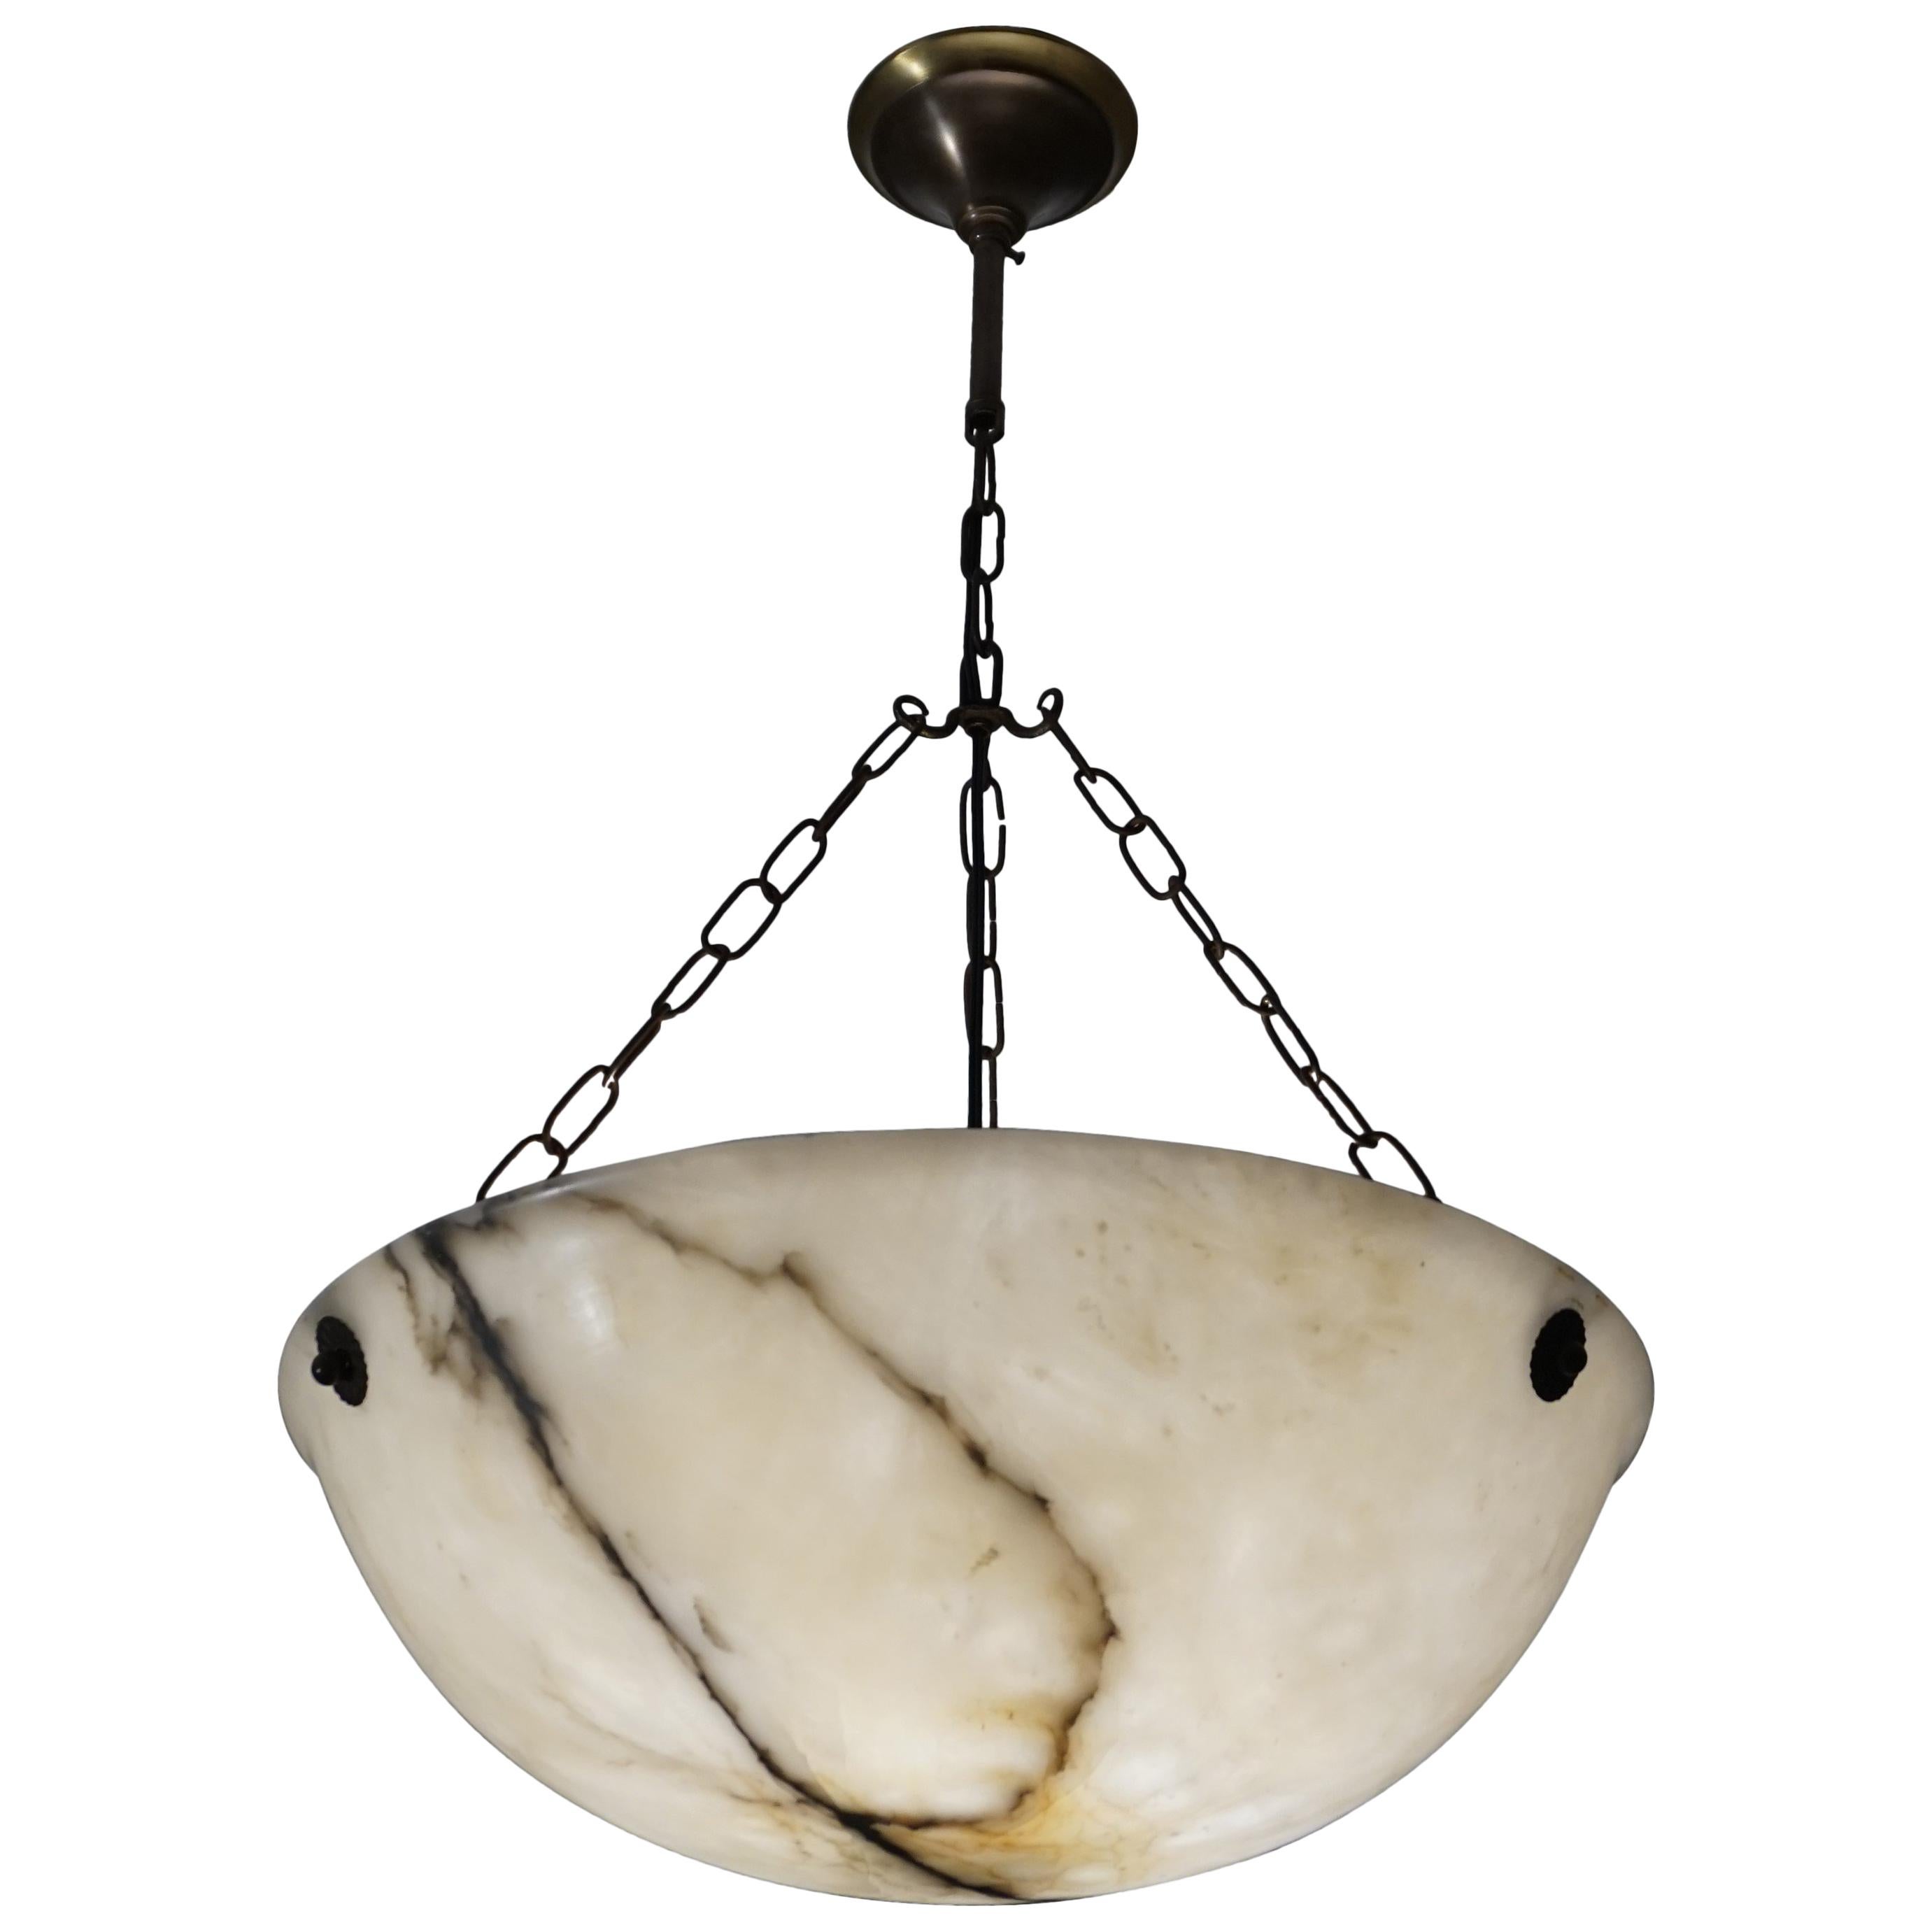 Early 20th Century Large and Amazing Condition Alabaster Pendant Chandelier